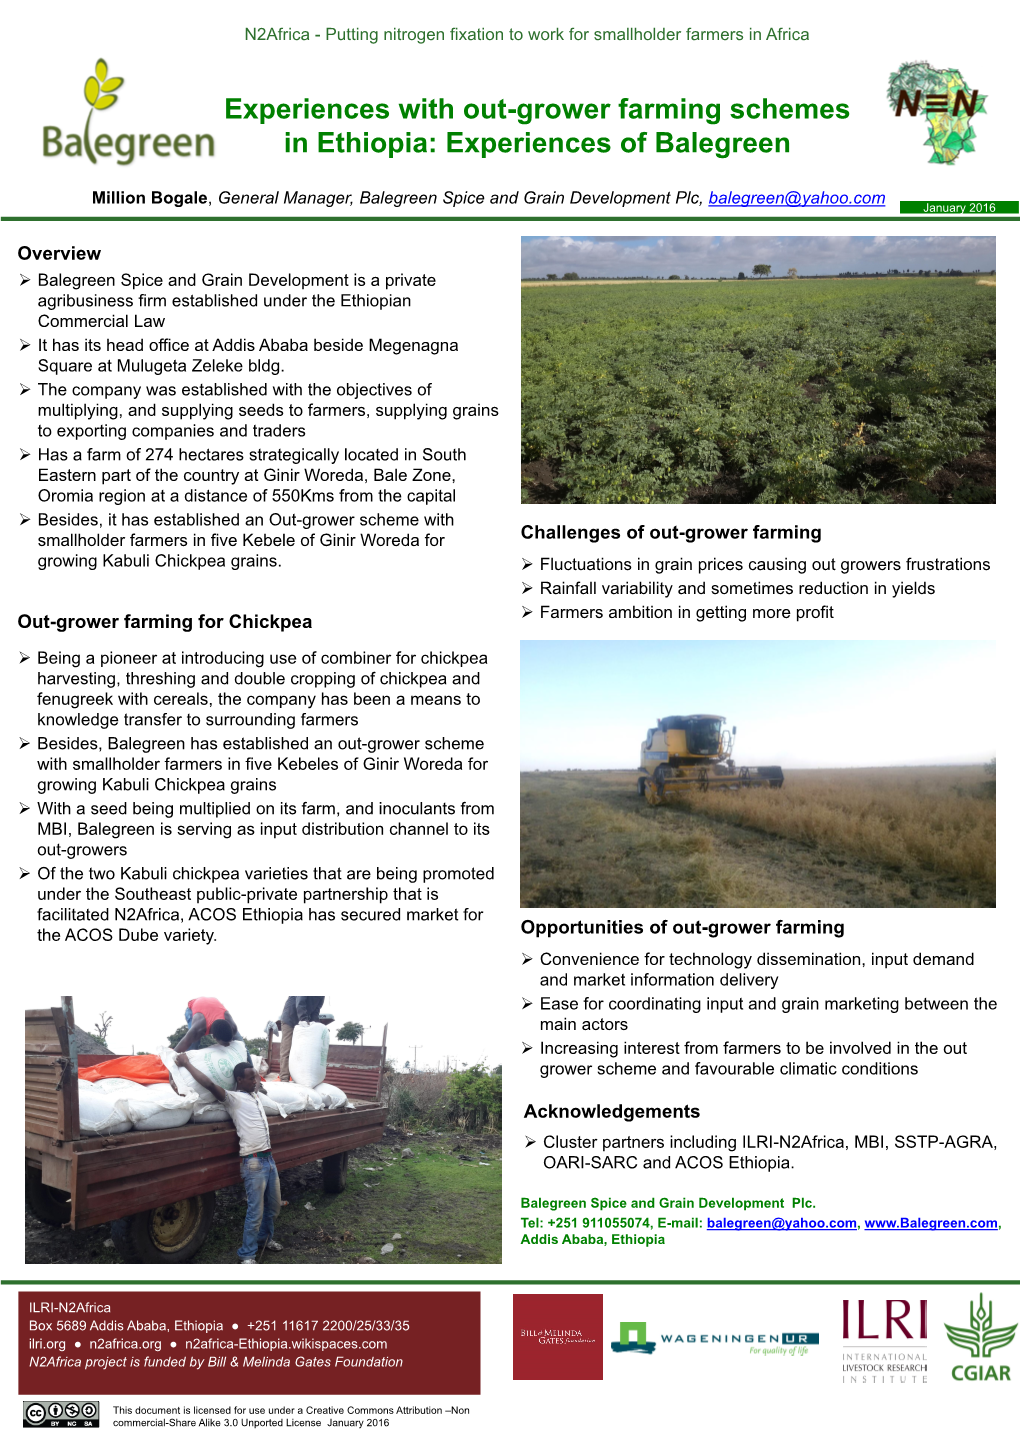 Experiences with Out-Grower Farming Schemes in Ethiopia: Experiences of Balegreen